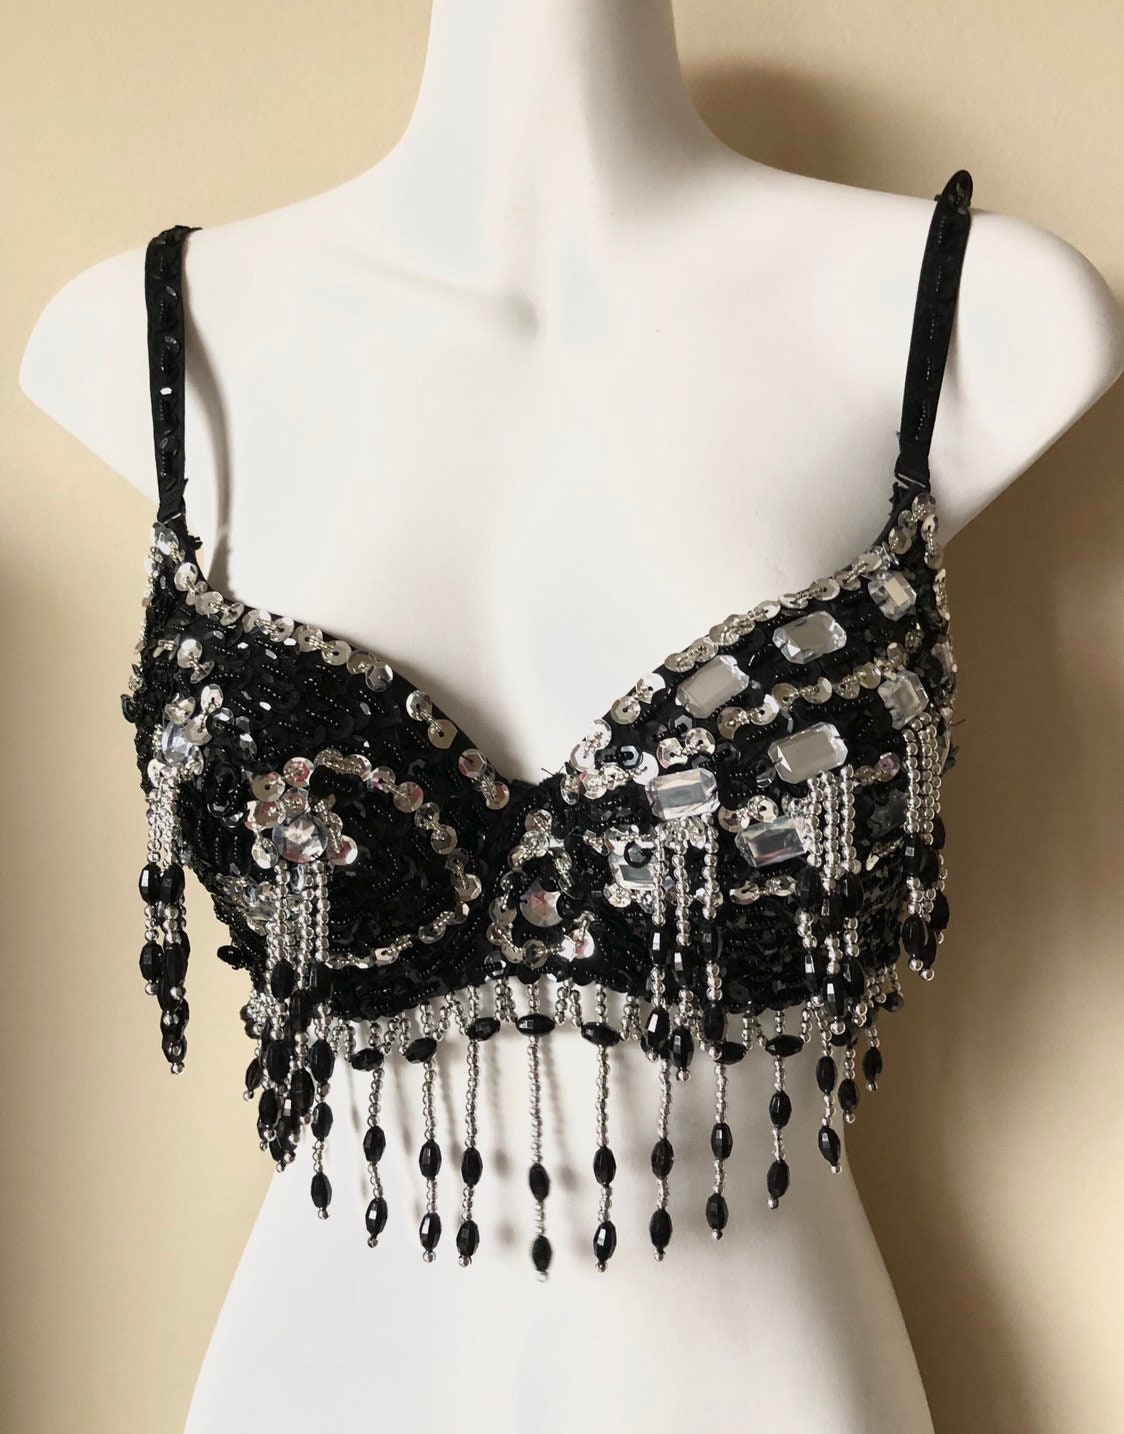 GetUSCart- Bettli Fashion Shining Sequins Coin Belly Dance Accessories  (Beaded Sequined Bra)